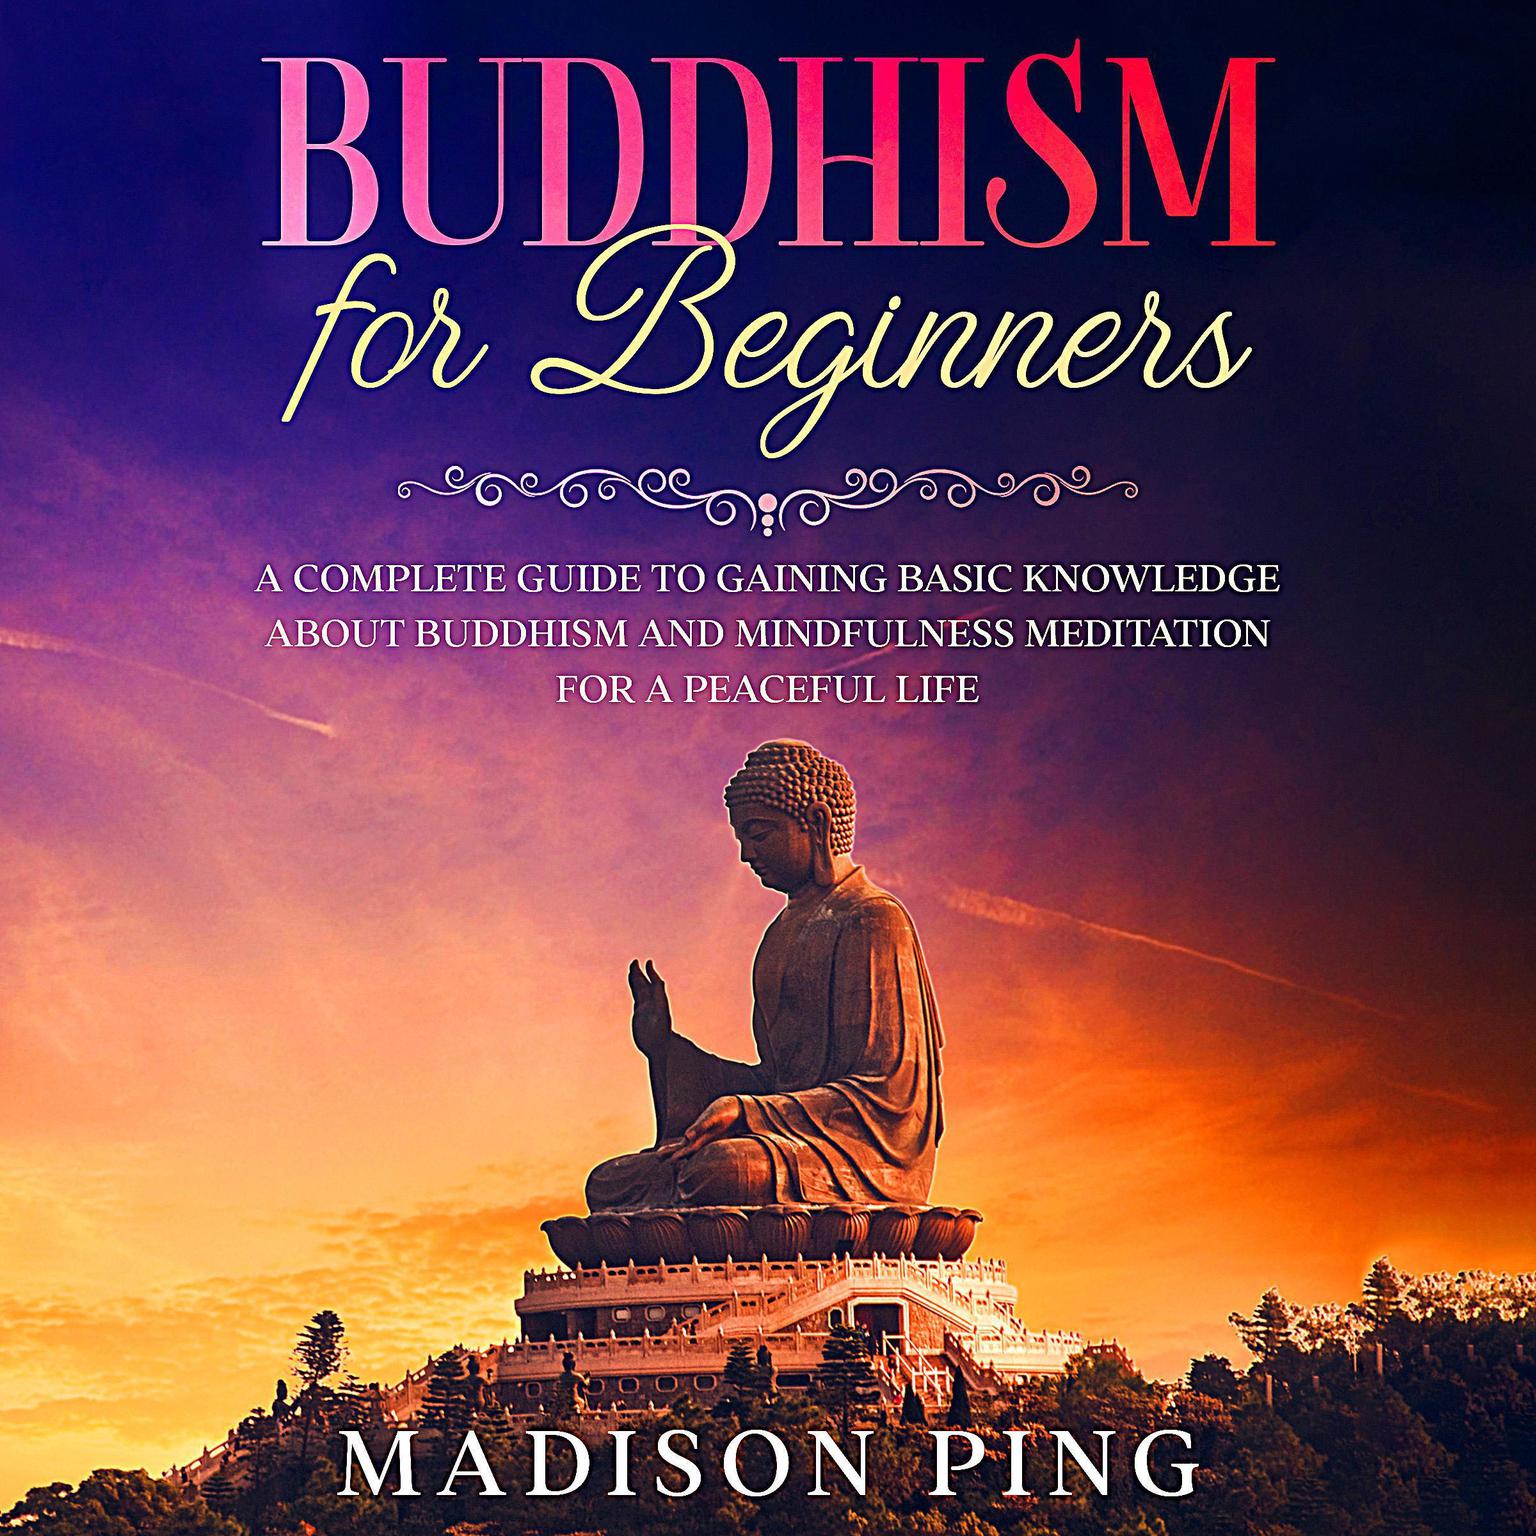 Buddhism for Beginners: A Complete Guide to Gaining Basic Knowledge About Buddhism and Mindfulness Meditation for a Peaceful Life Audiobook, by Madison Ping